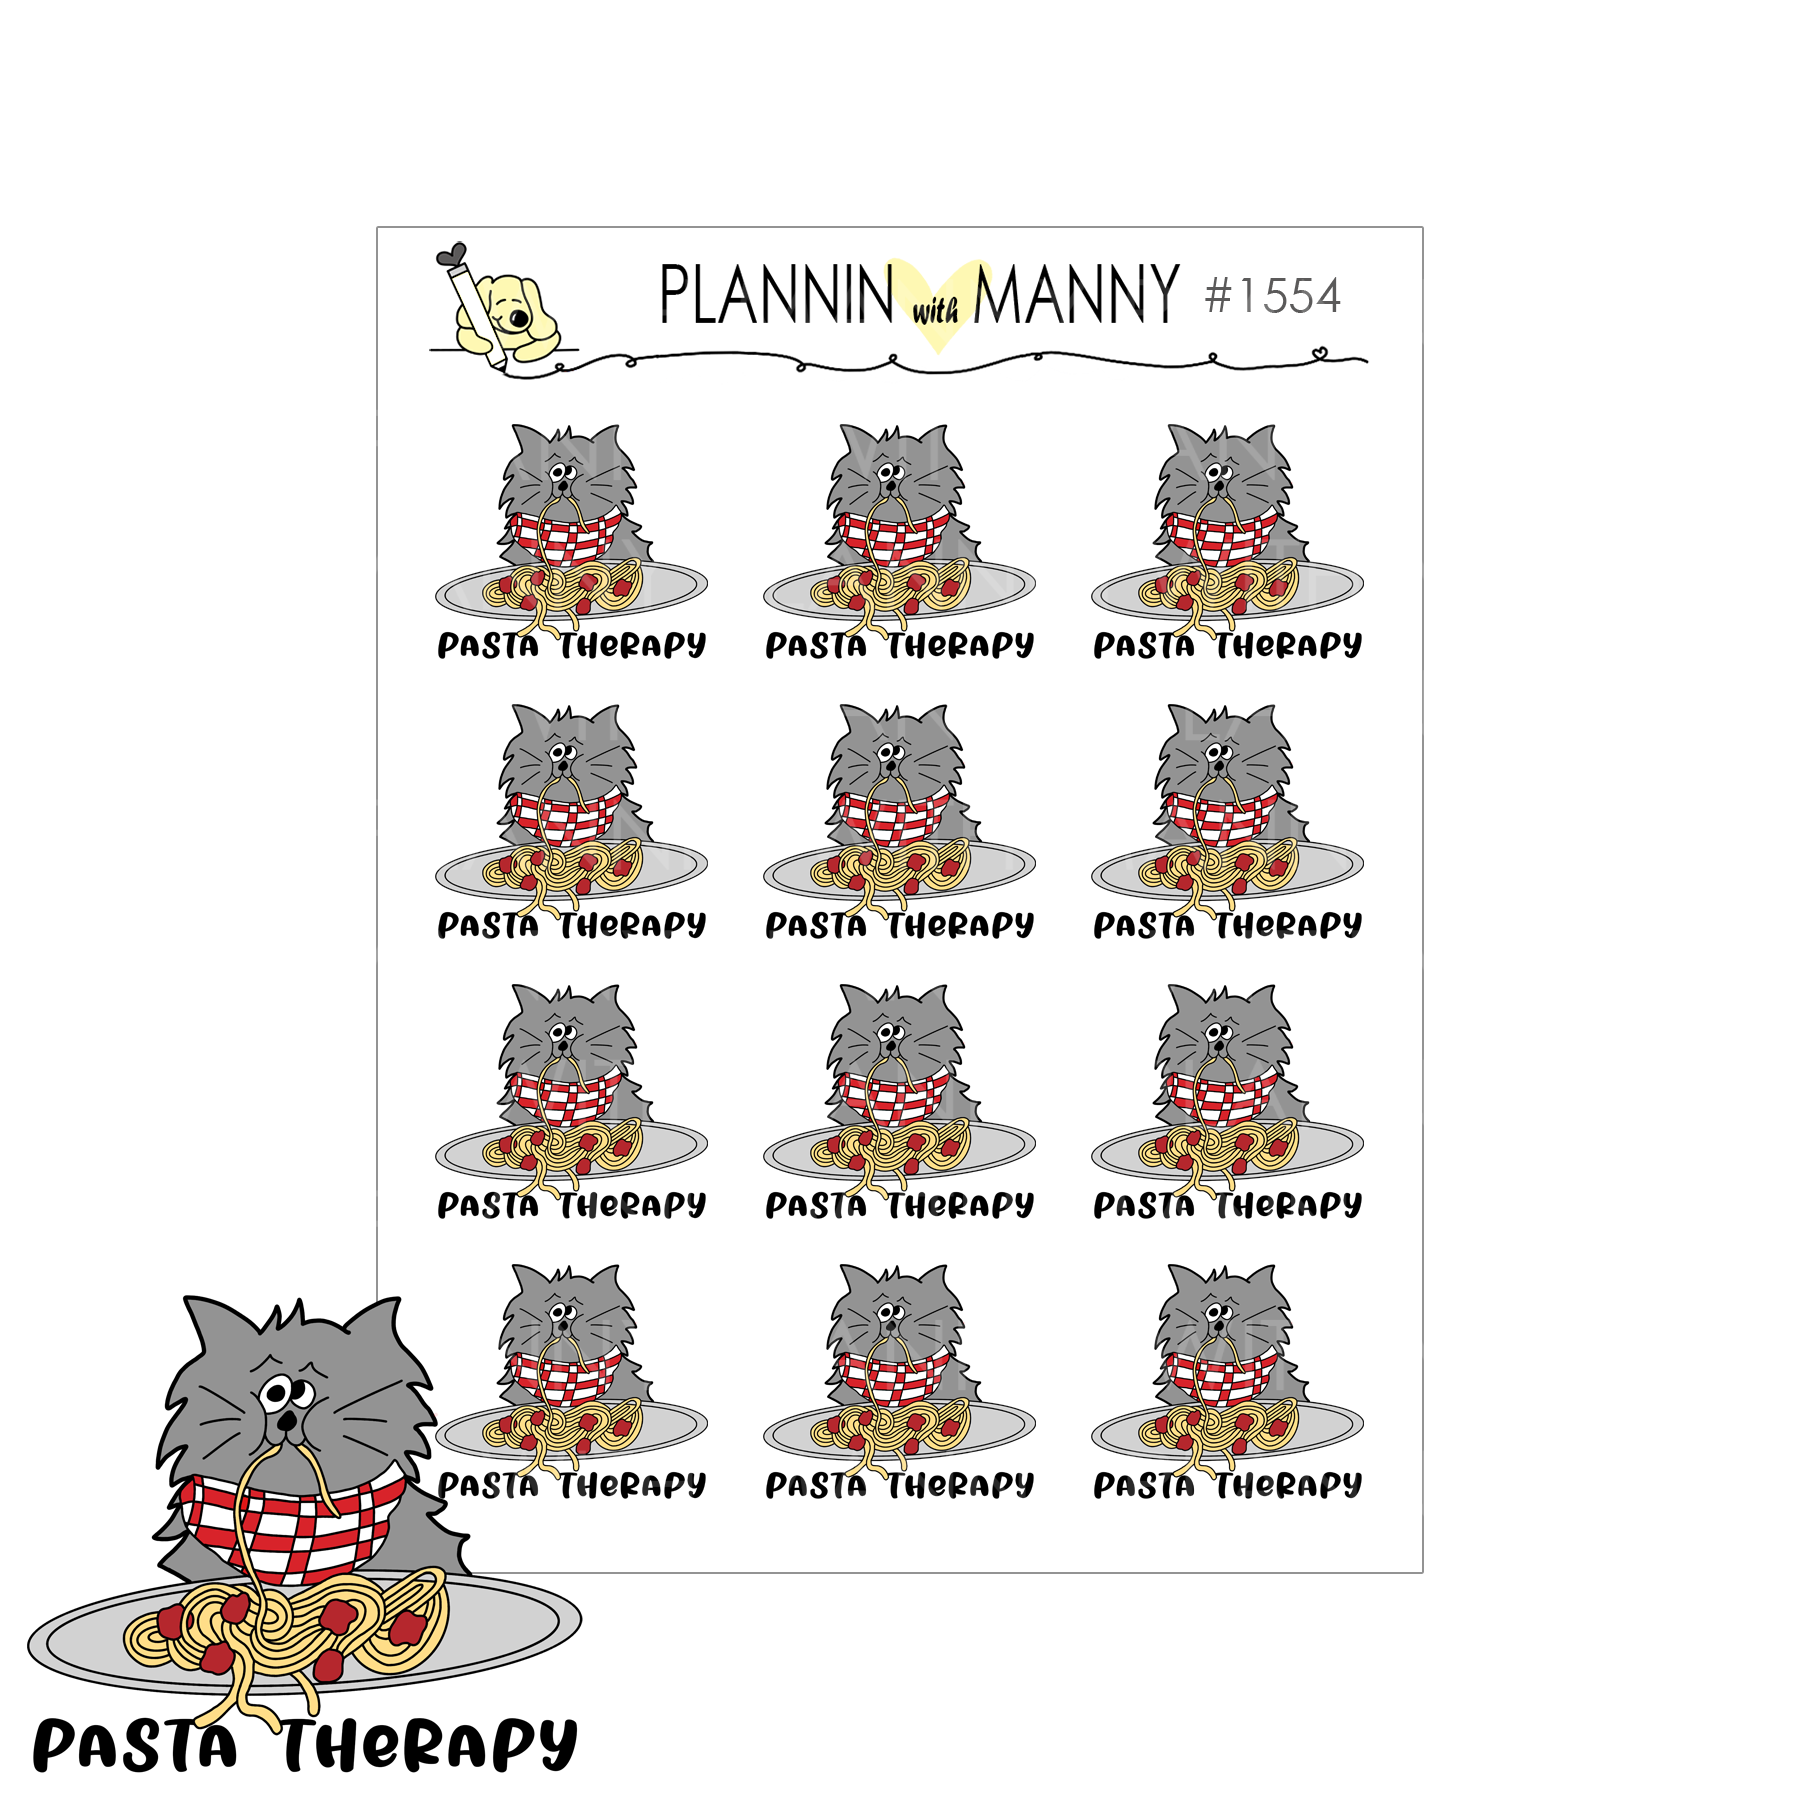 1554 Pasta Therapy Planner Stickers